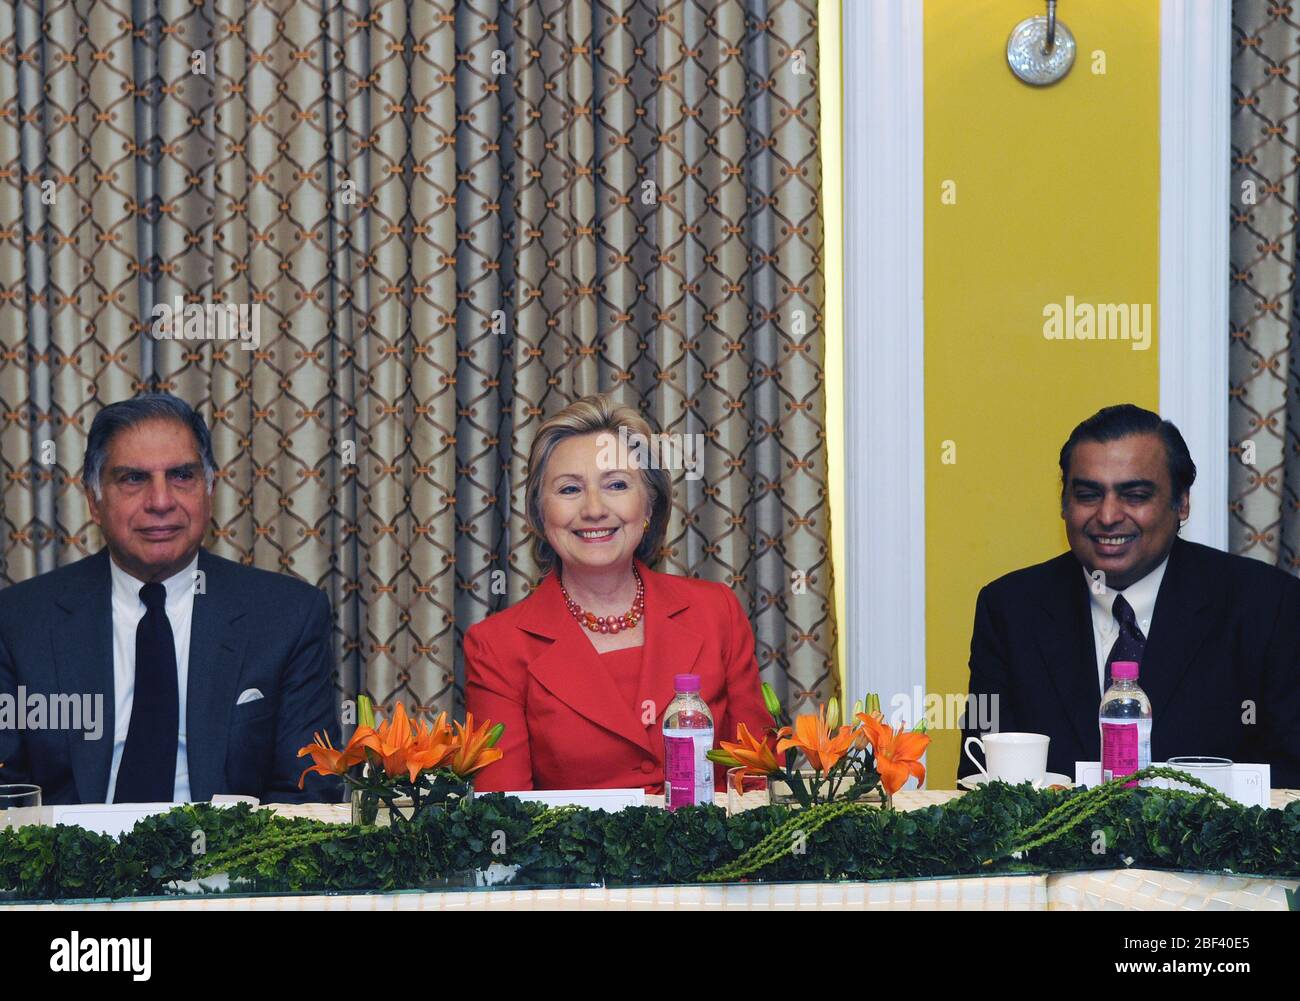 2009 - U.S. Secretary of State Hillary Rodham Clinton meets with India's business leaders. From left to right: Ratan Tata, Charmain of the Tata Group; Secretary Clinton; Mukesh Ambani, Chairman and Managing Director of Reliance Industries Stock Photo